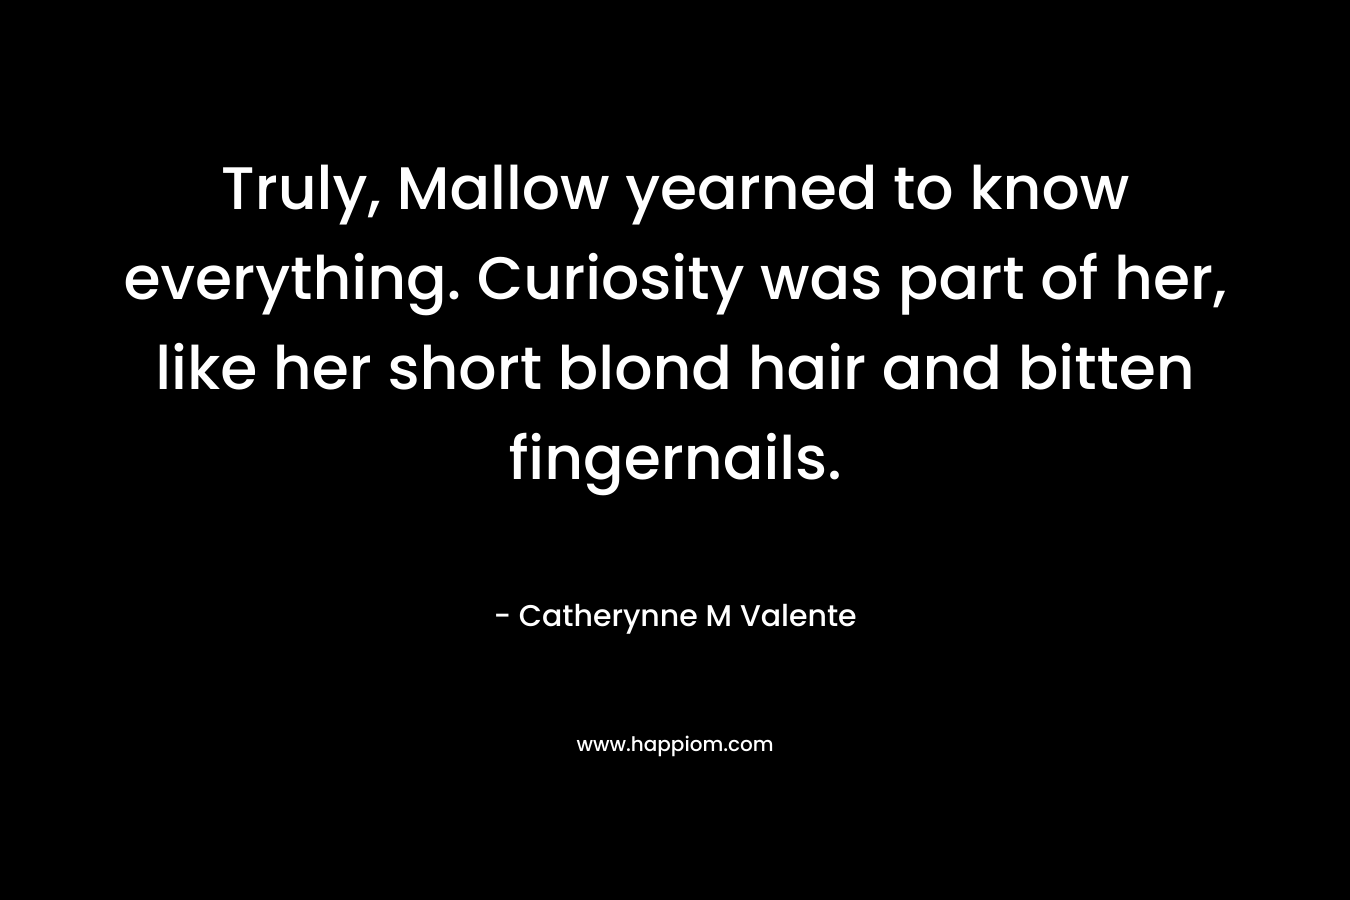 Truly, Mallow yearned to know everything. Curiosity was part of her, like her short blond hair and bitten fingernails.